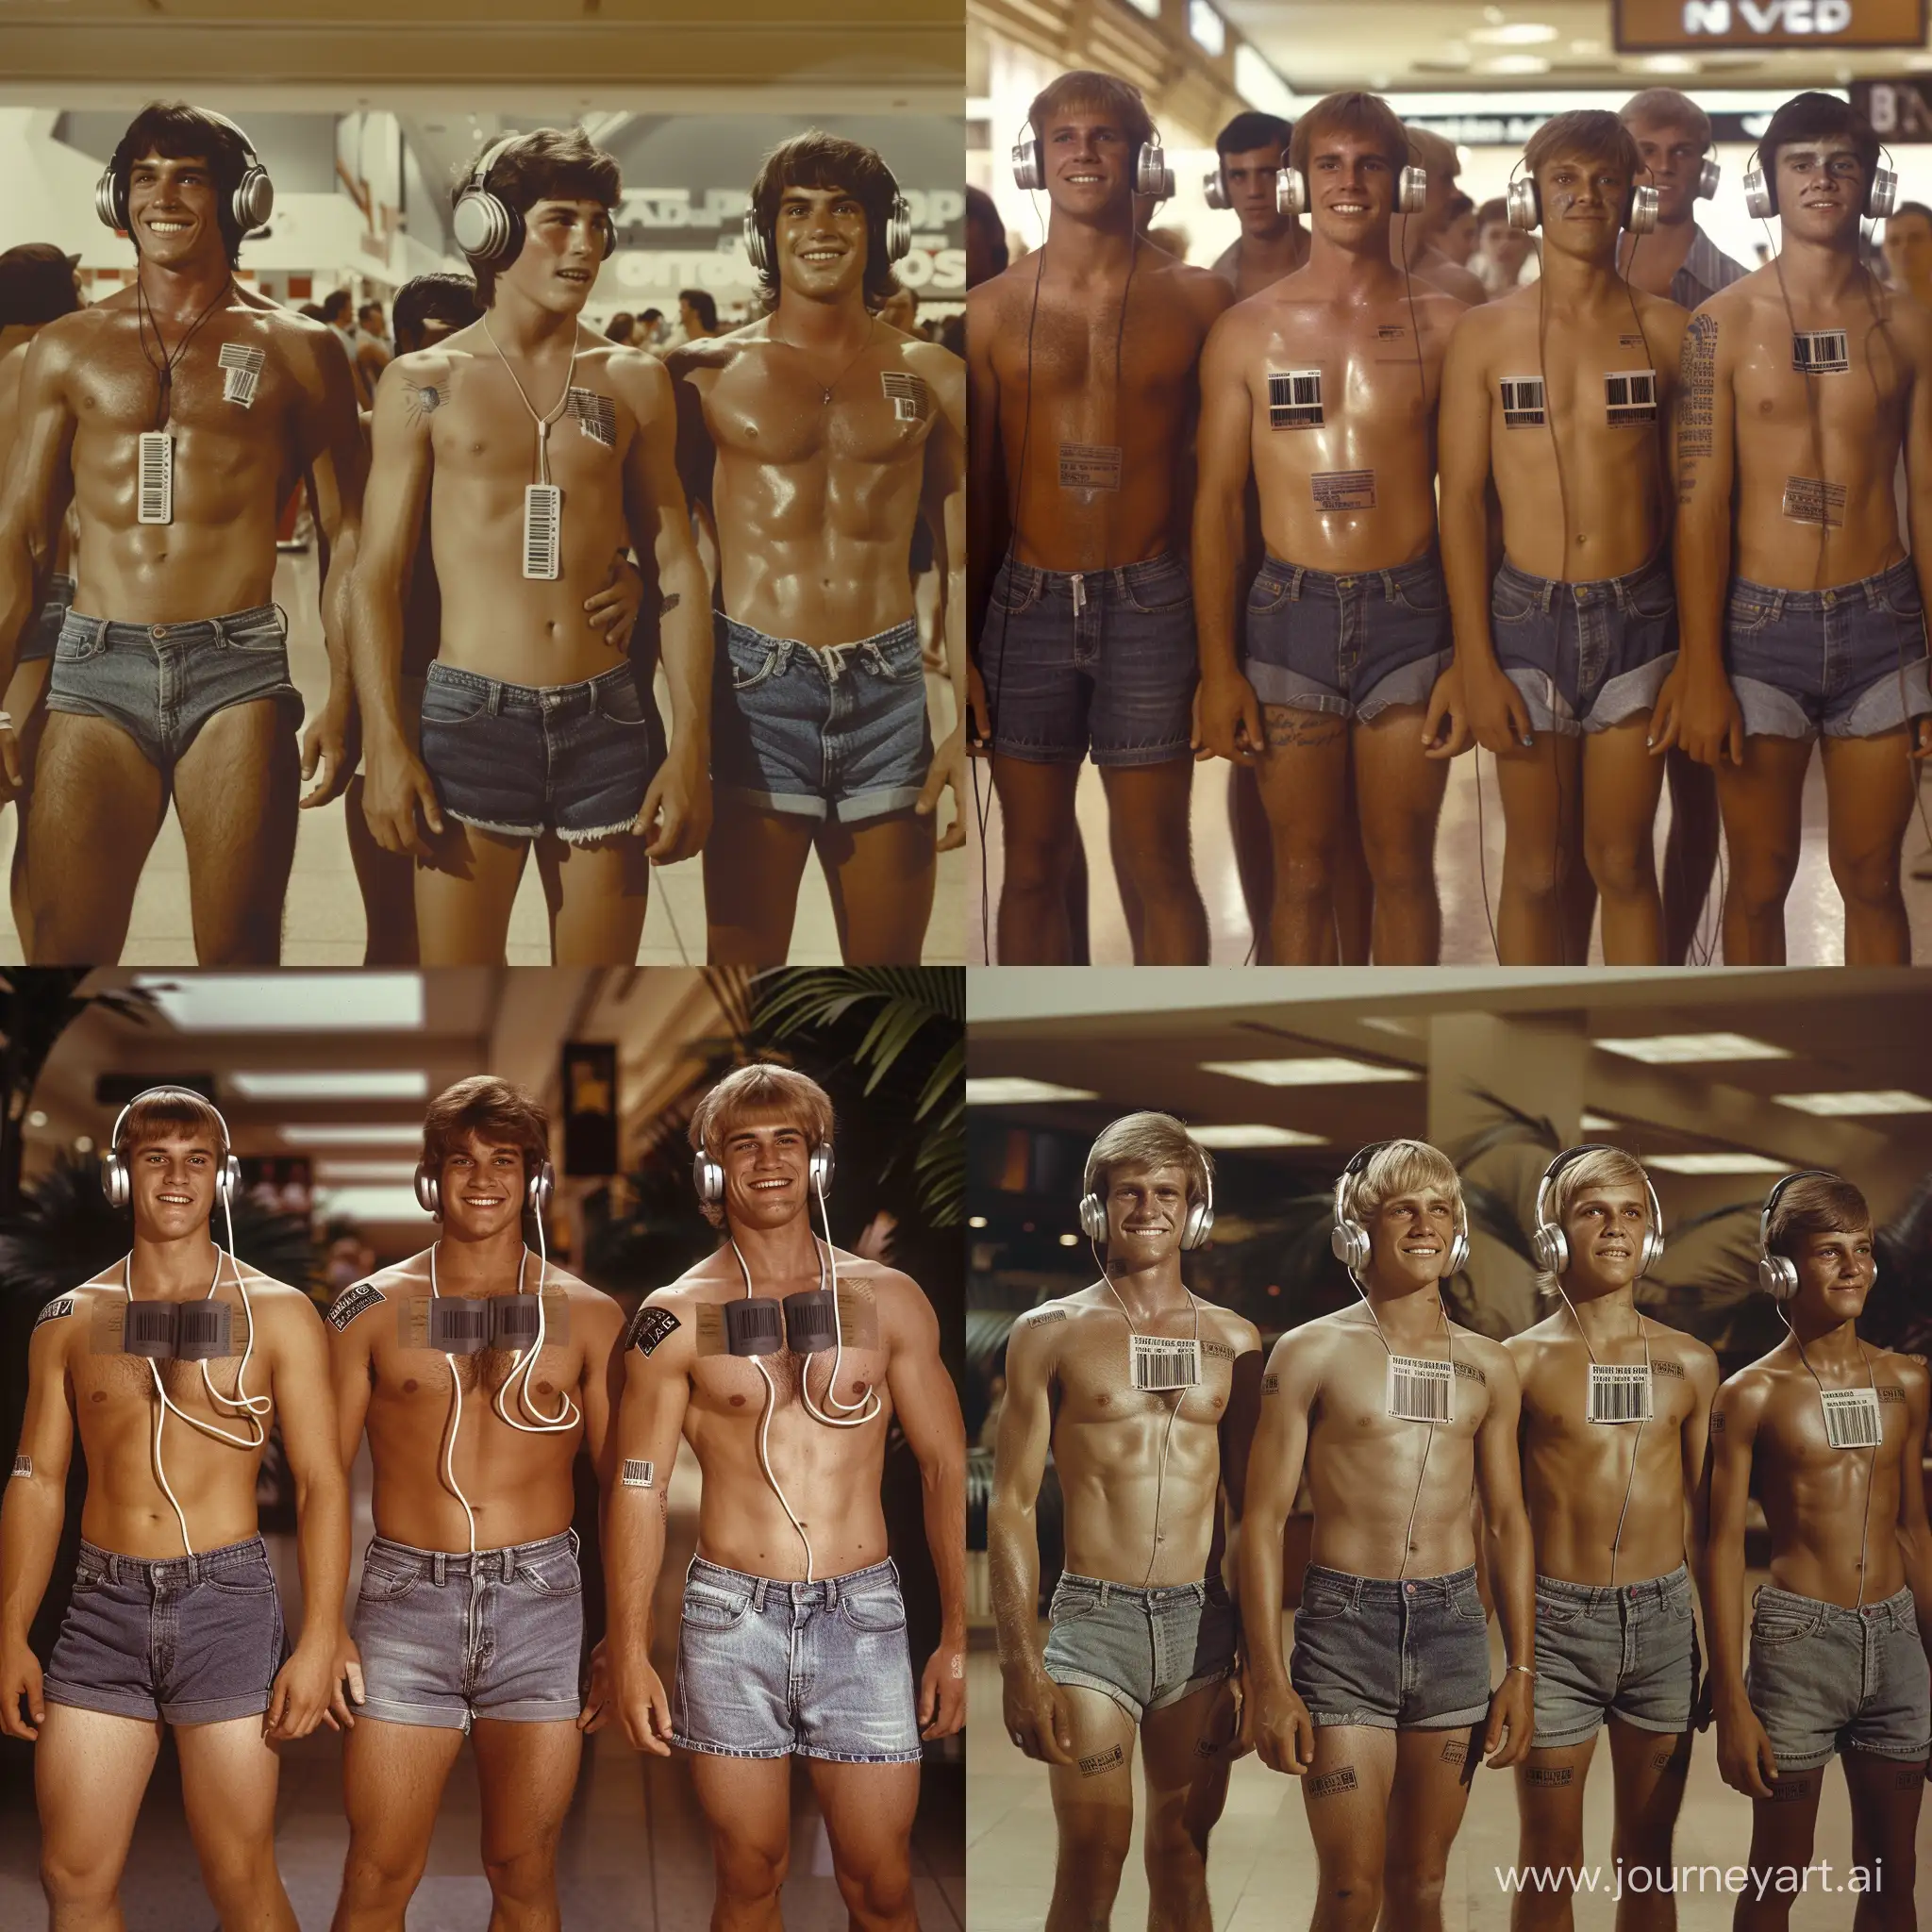 Handsome muscular middle-aged men and handsome muscular college-age boys each wear silver headphones and fitted denim cutoff shorts, dazed smiles, small barcode tattooed on each man's chest, 1970s shopping mall setting, facing the viewer, mass indoctrination, color image, hyperrealistic, cinematic